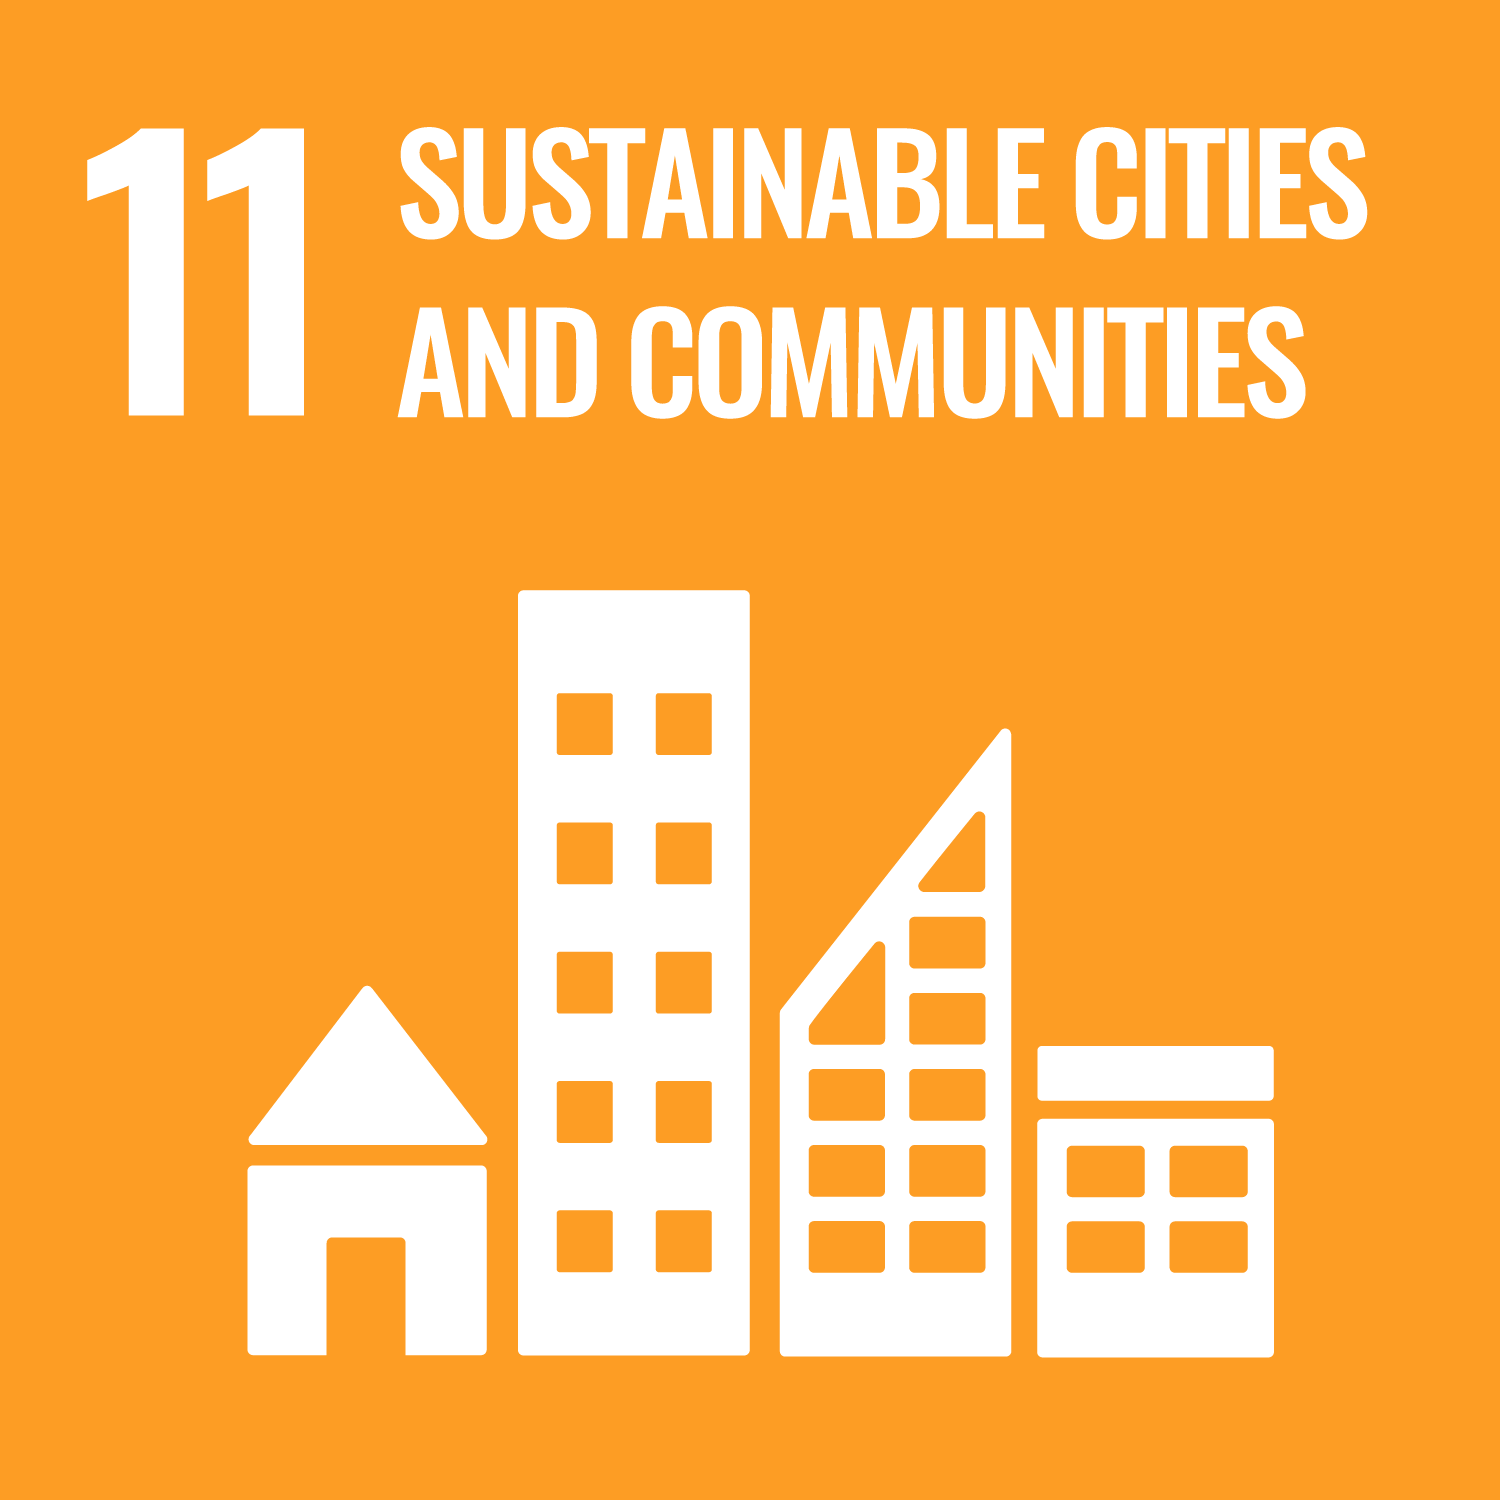 ［Goal 11］ Sustainable Cities and Communities